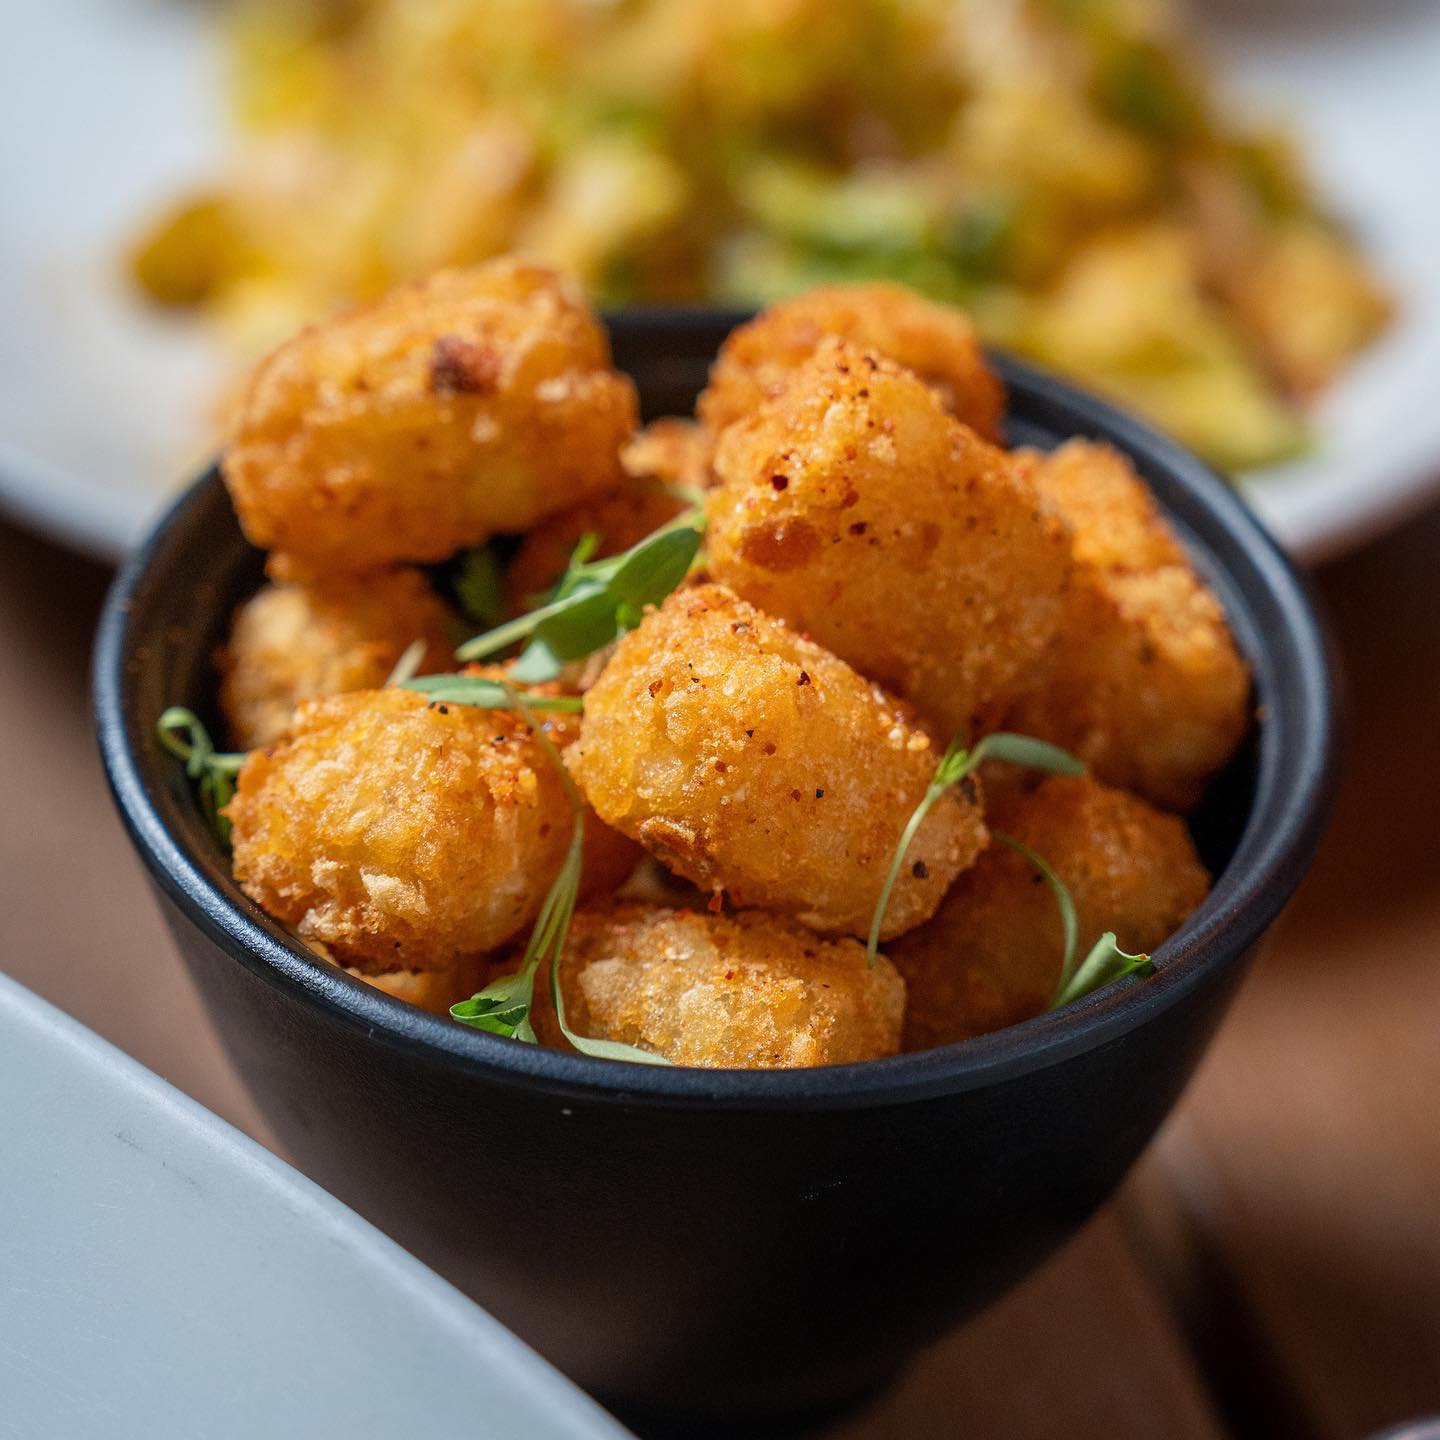 a bowl of tater tots